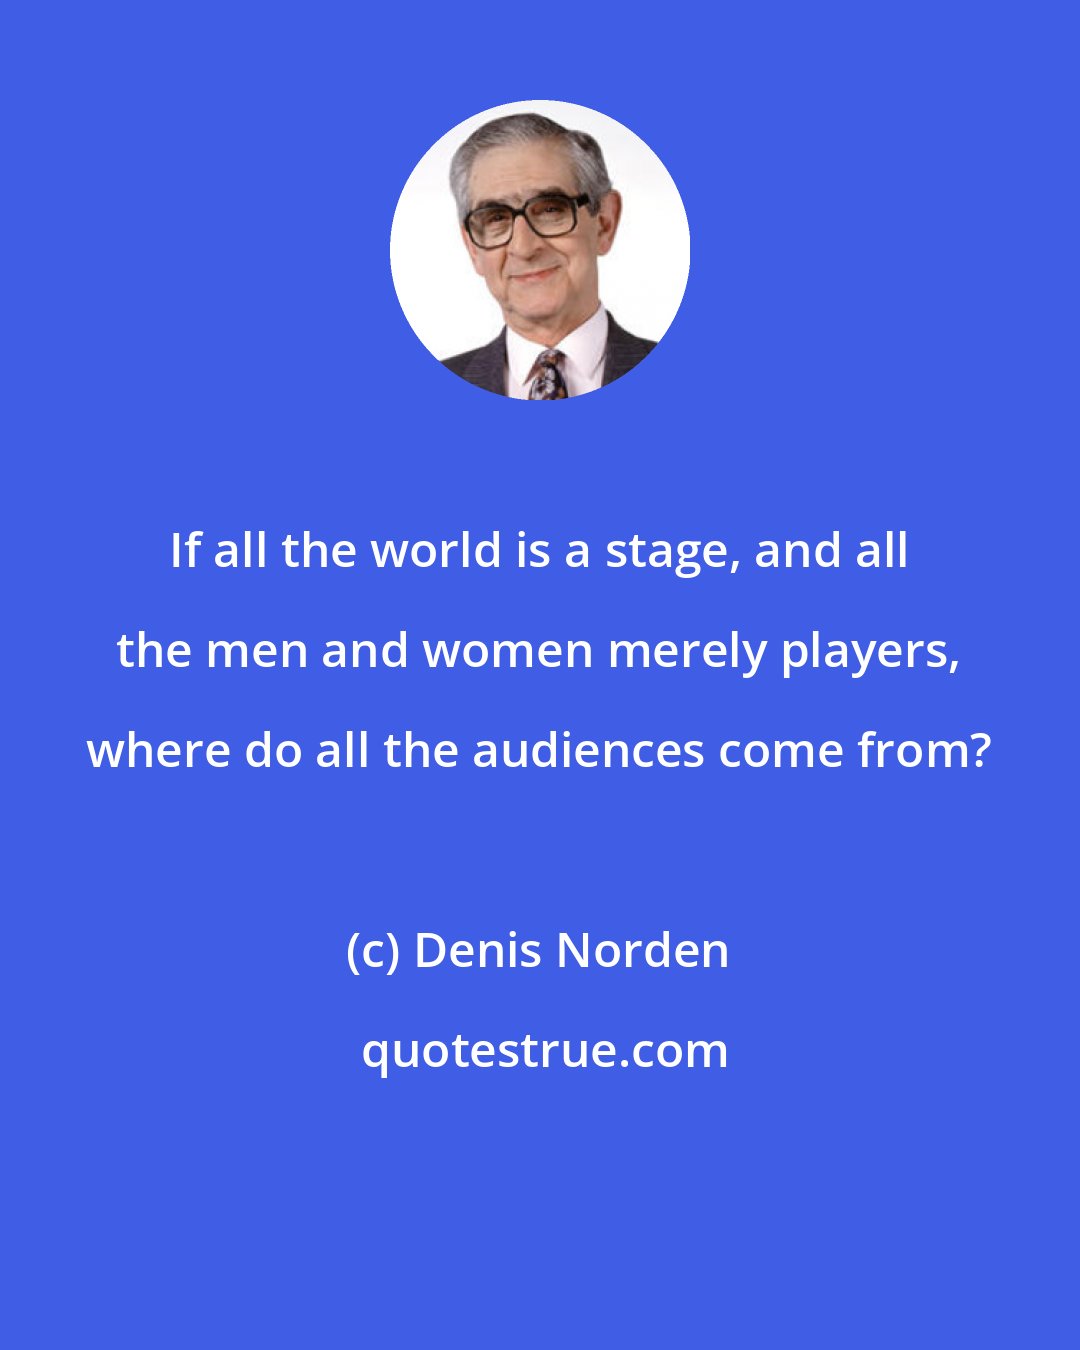 Denis Norden: If all the world is a stage, and all the men and women merely players, where do all the audiences come from?